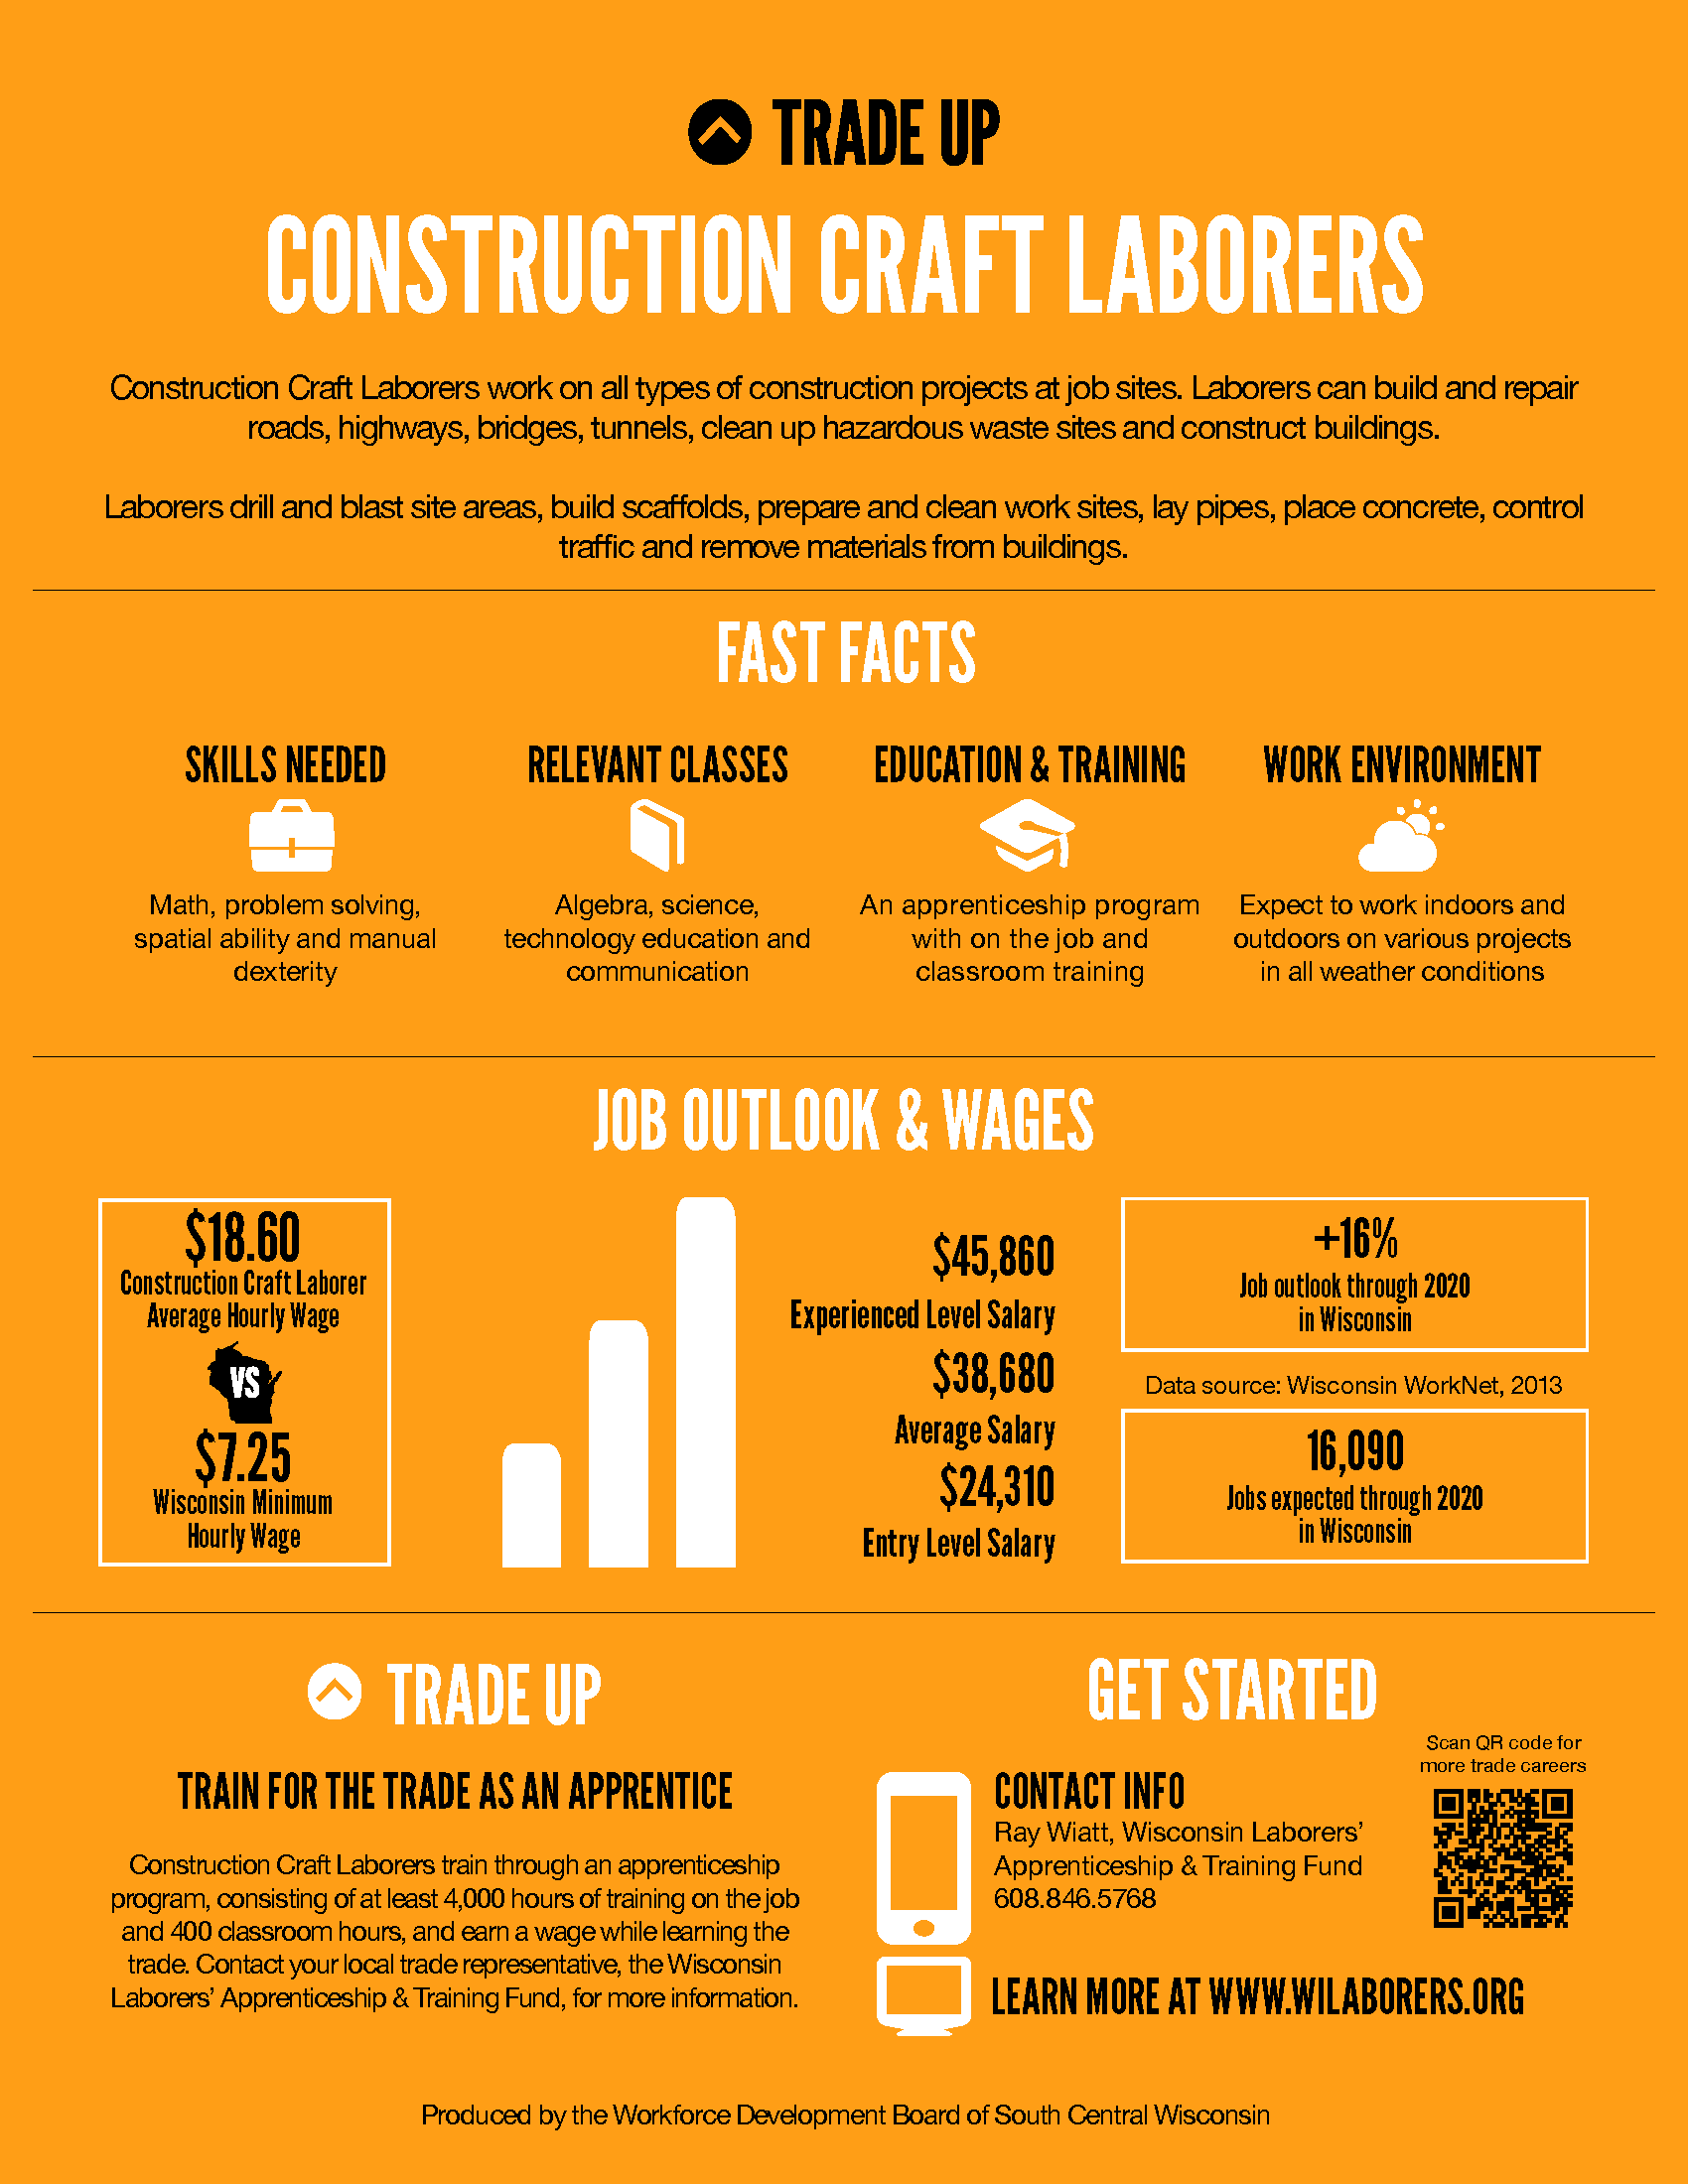 Trade Up poster for Construction Craft Laborers